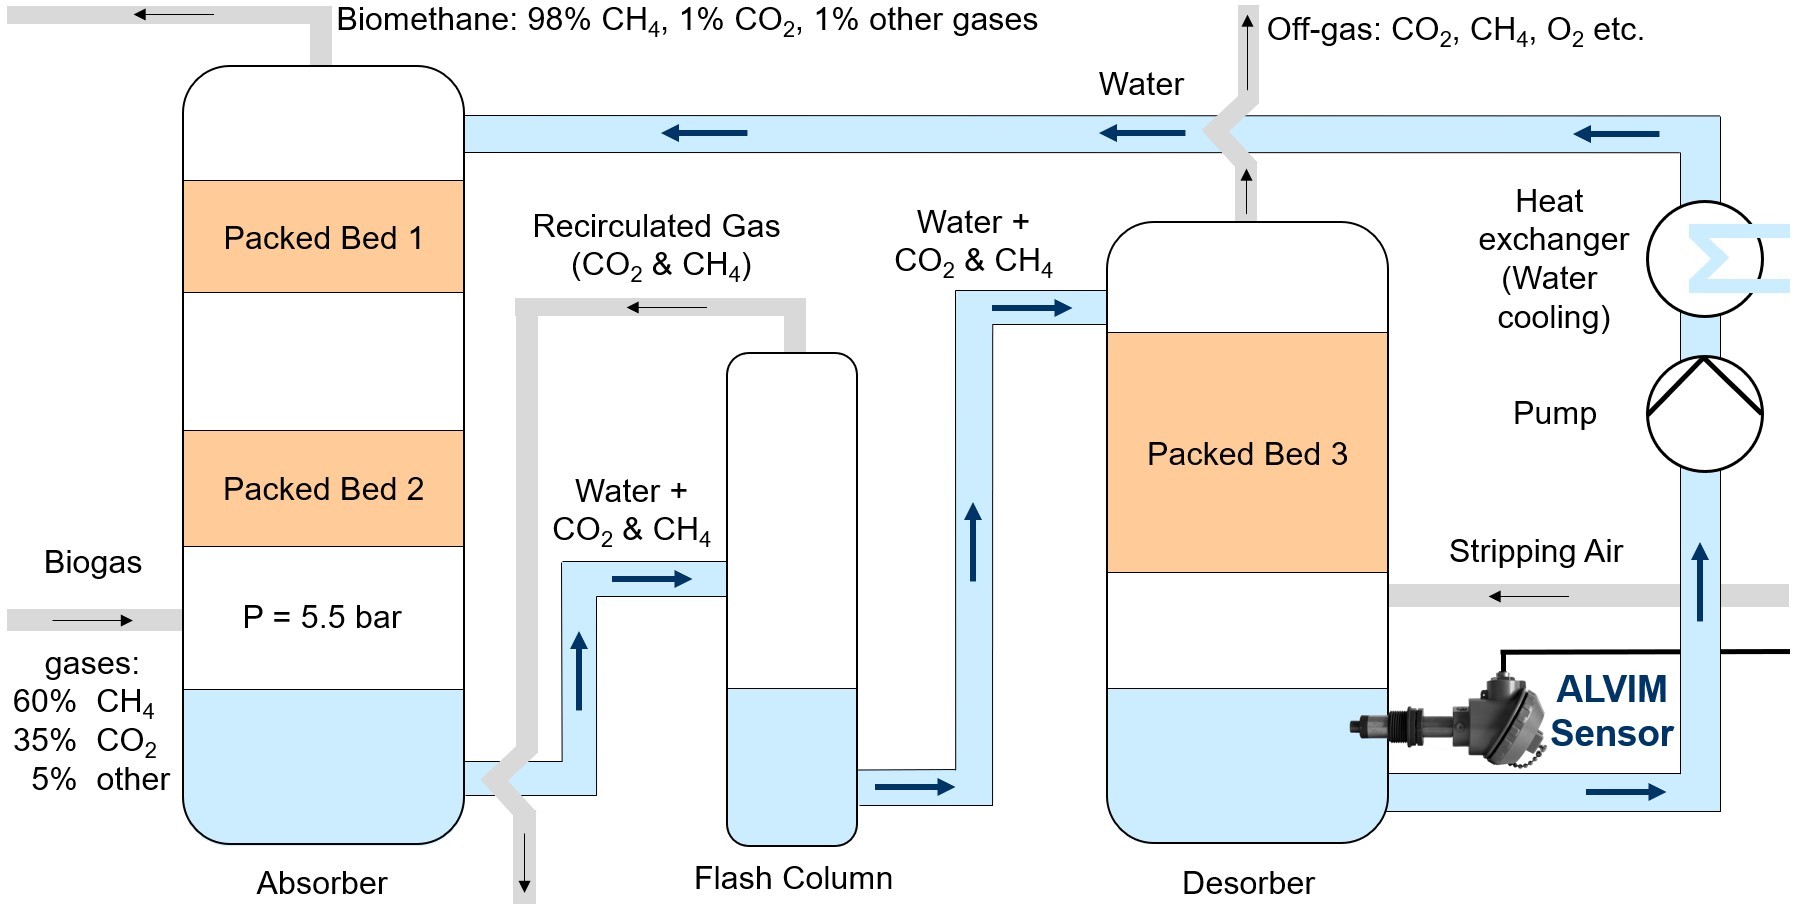 Scheme of absorber / desorber water loop of the biogas upgrading plant